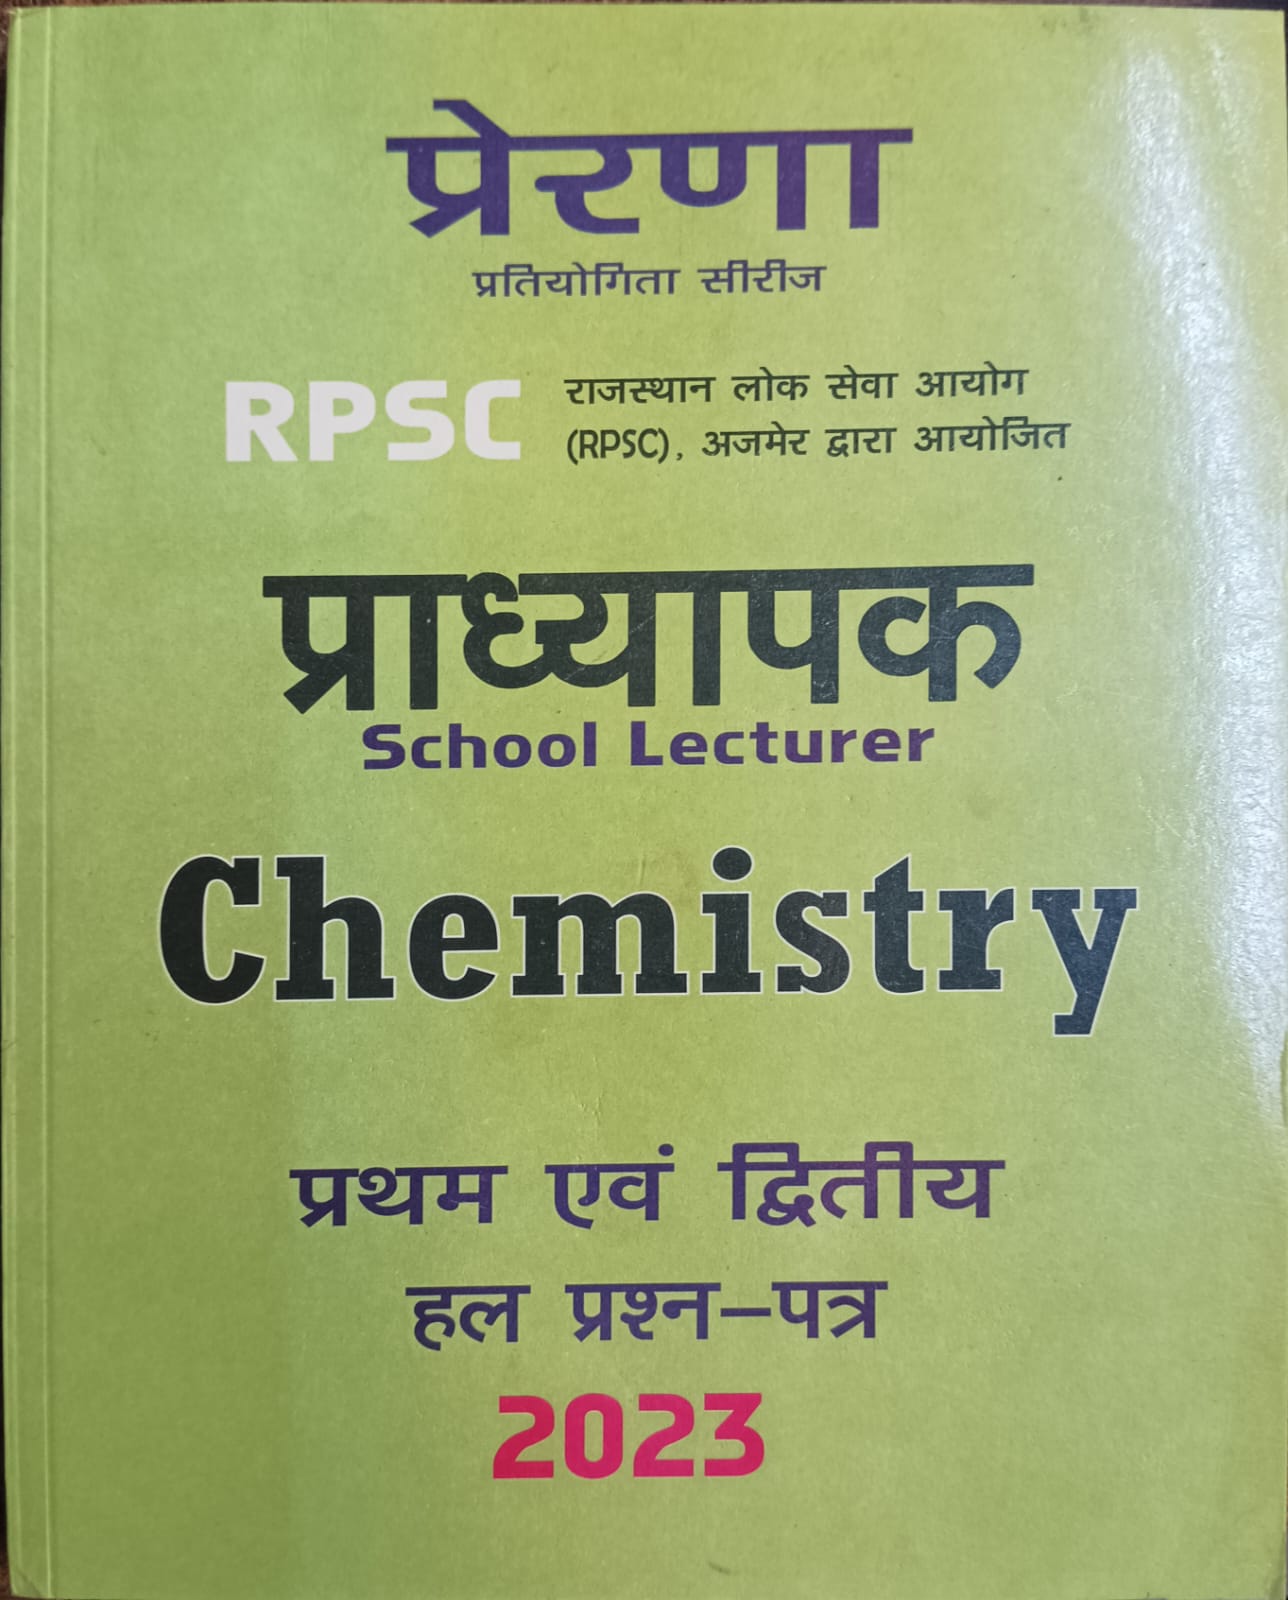 Prerna RPSC school lecturer chemistry and 1st paper solved paper 2023